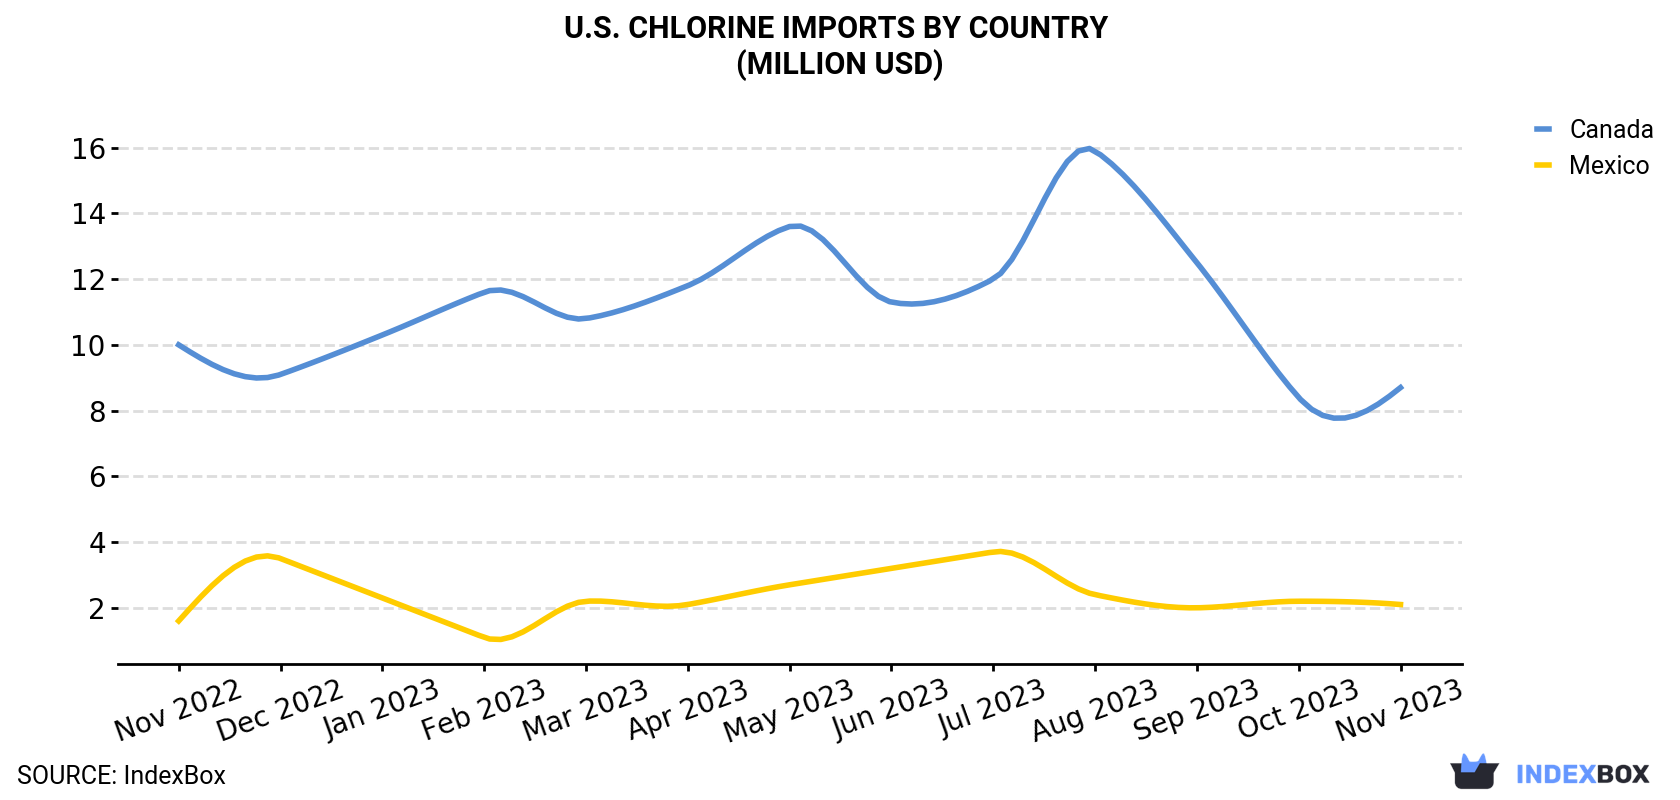 U.S. Chlorine Imports By Country (Million USD)